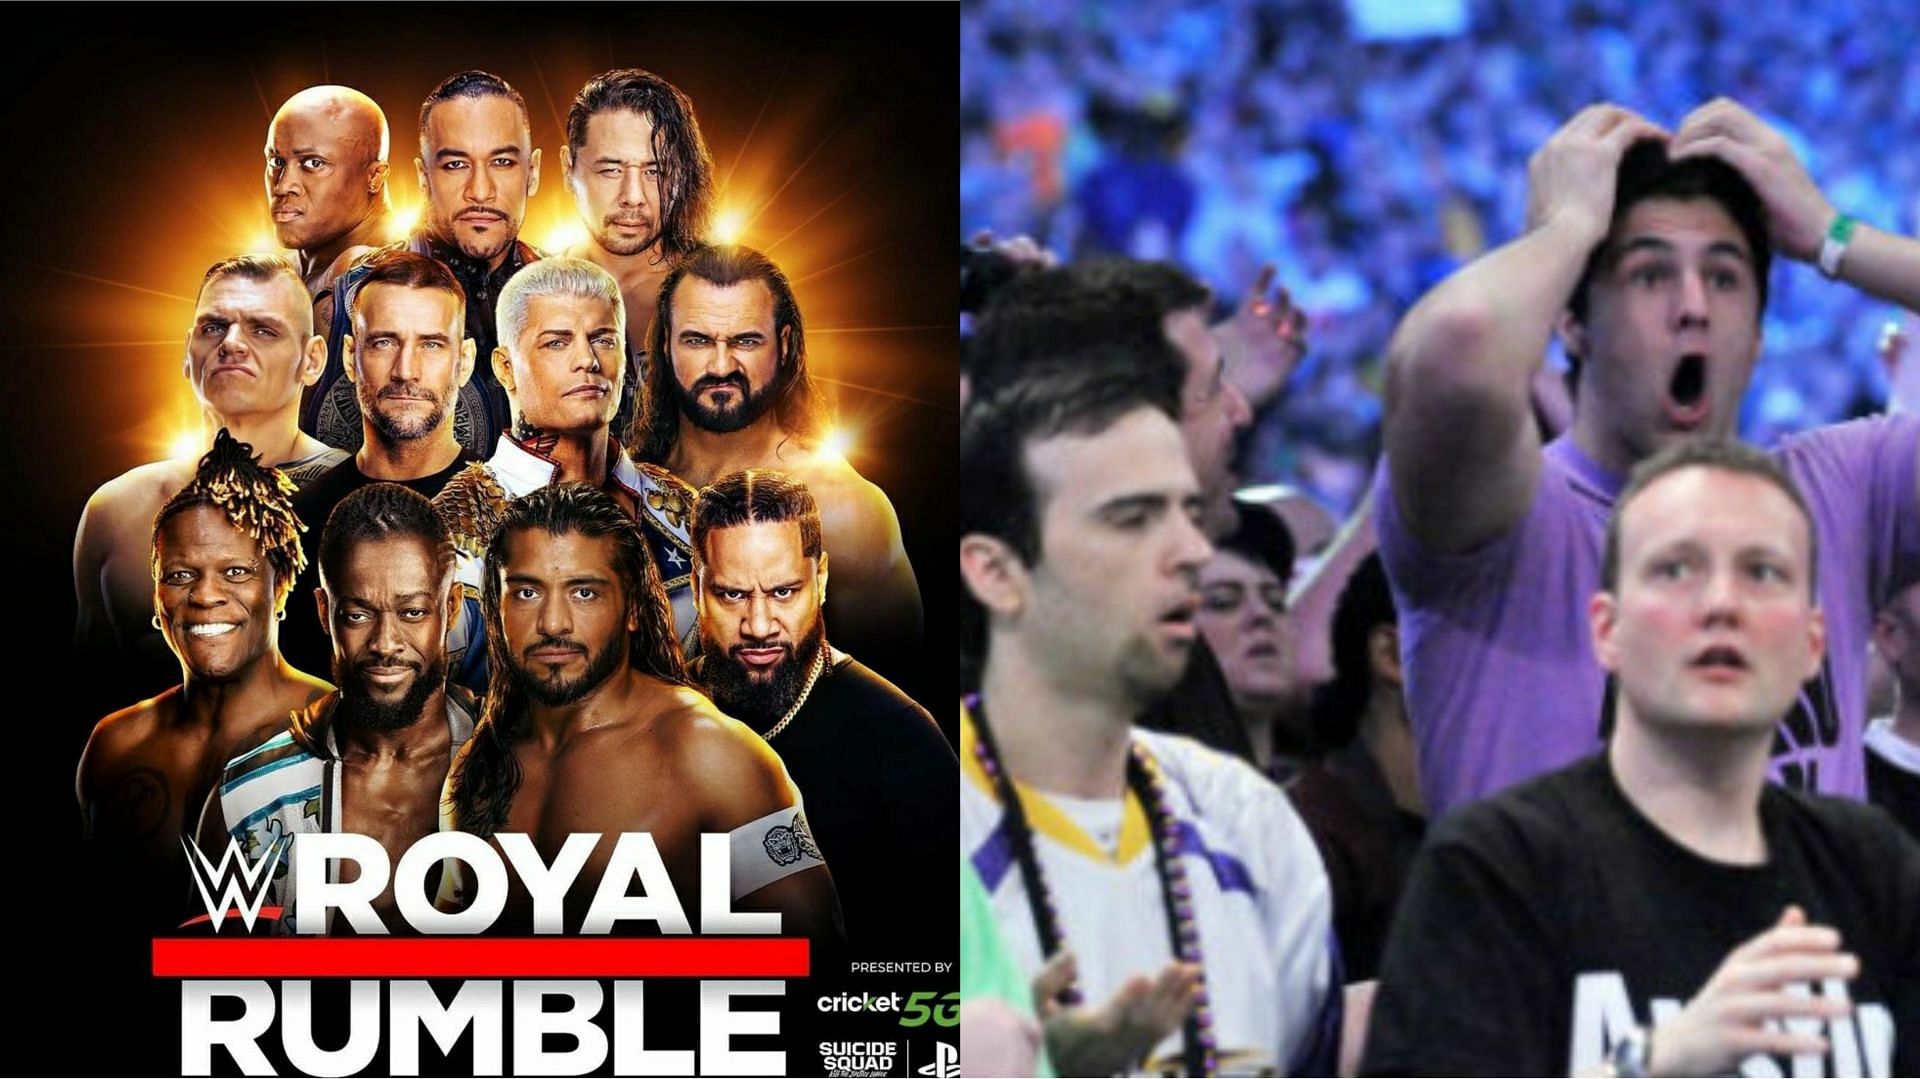 WWE Royal Rumble took place in Florida on Saturday!